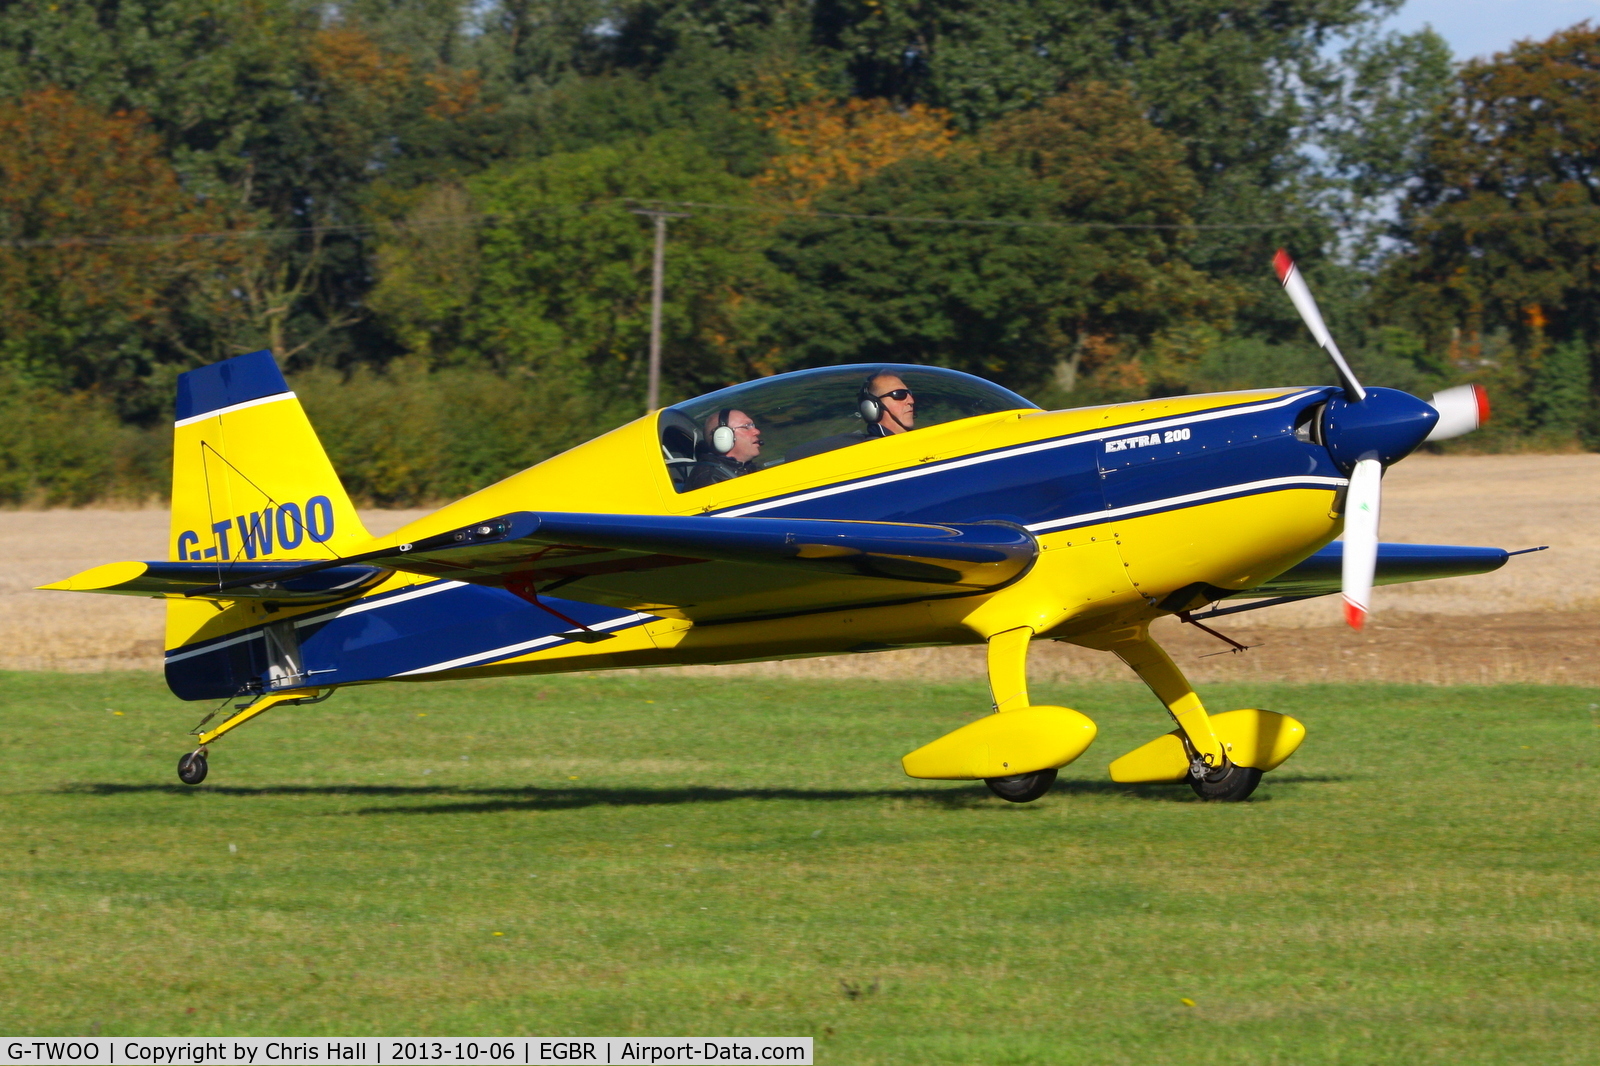 G-TWOO, 1996 Extra EA-300/200 C/N 05, at Breighton's Pre Hibernation Fly-in, 2013